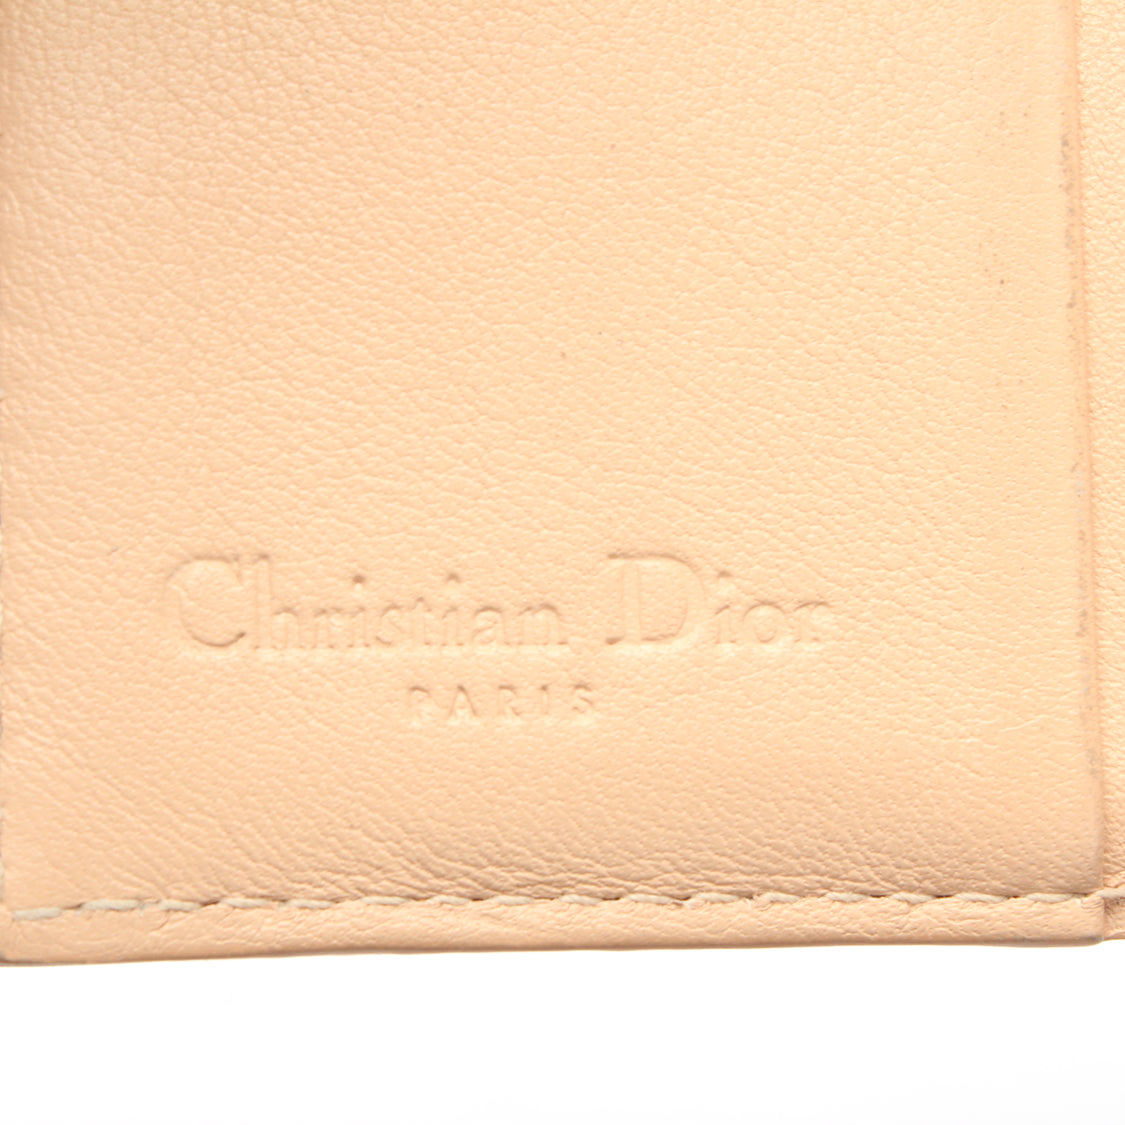 Christian Dior Leather Wallet Yellow&Beige Colour - Excellent Condition